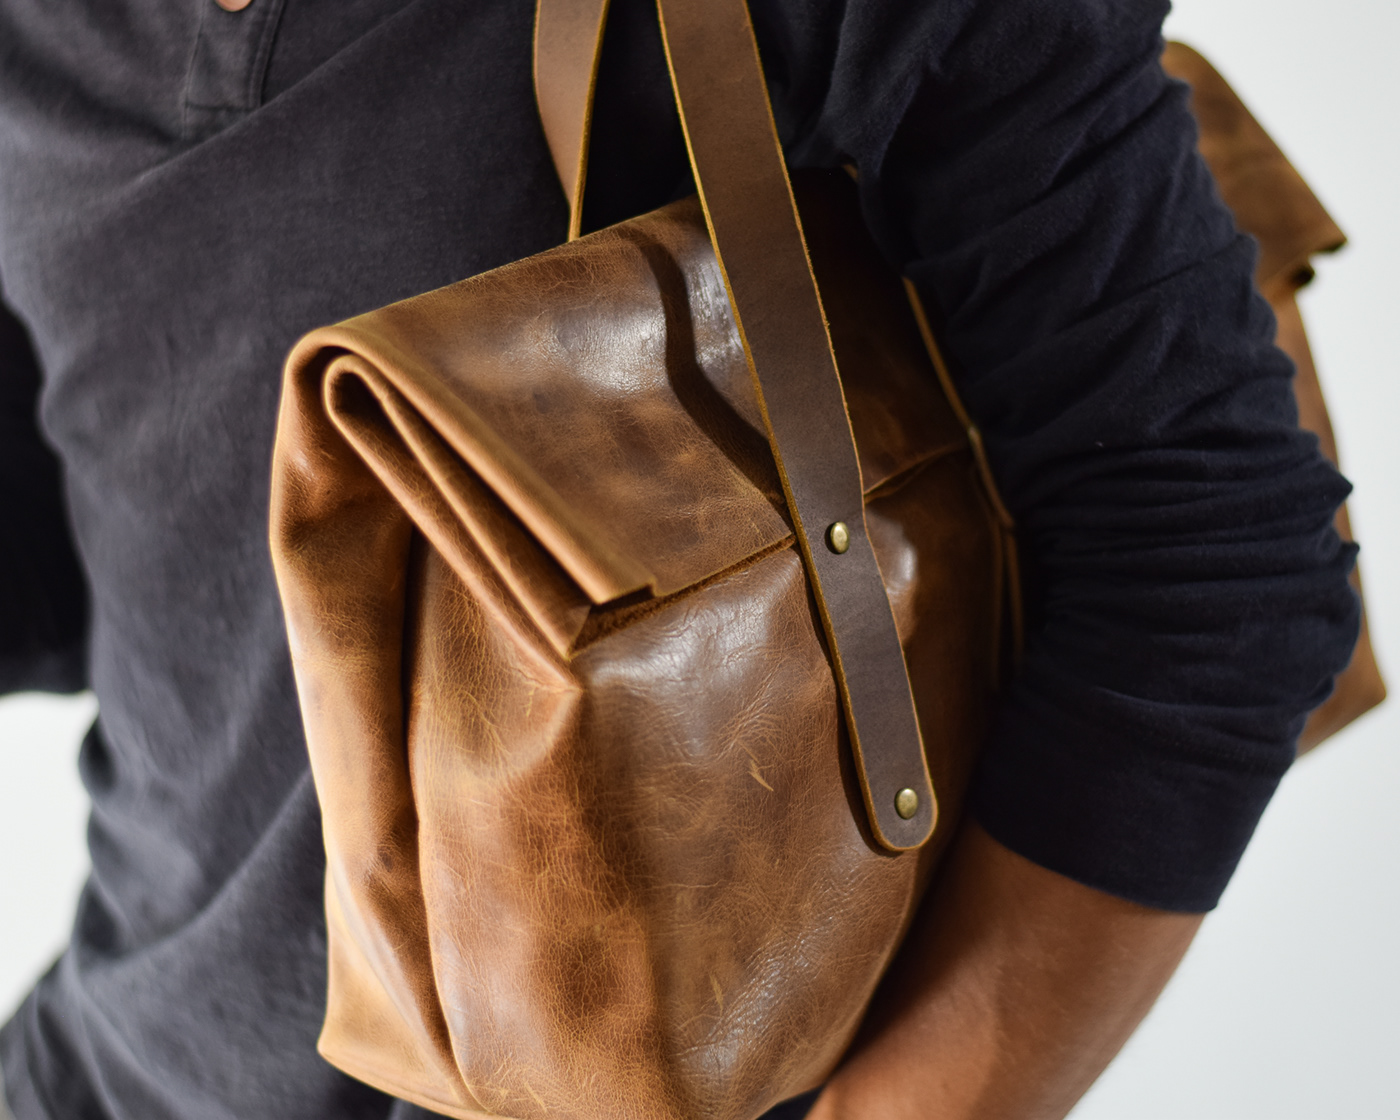 leather goods leather bag leather bag duffel bag